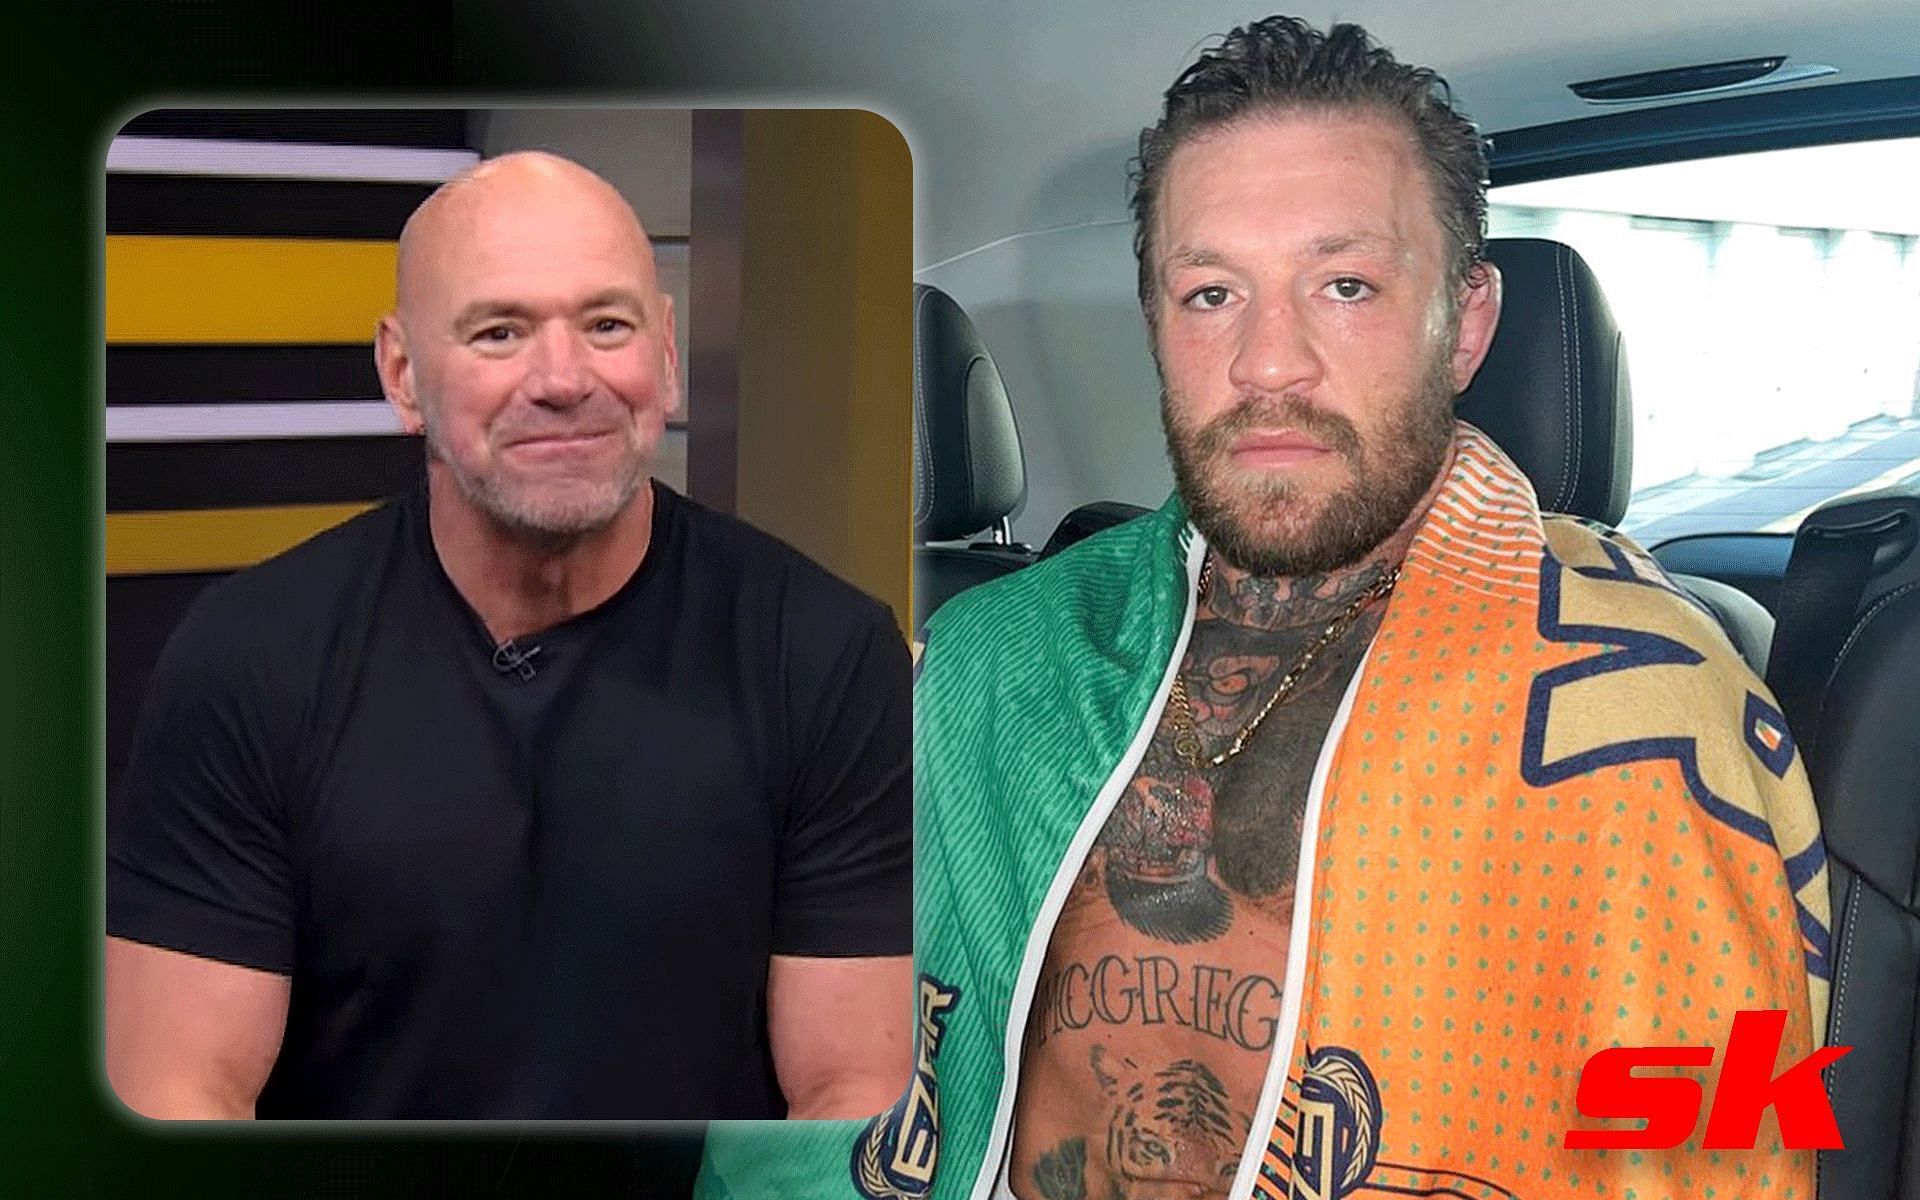 Dana White and Conor McGregor [Image credits: @danawhite on Instagram and @thenotoriousmma on Instagram]